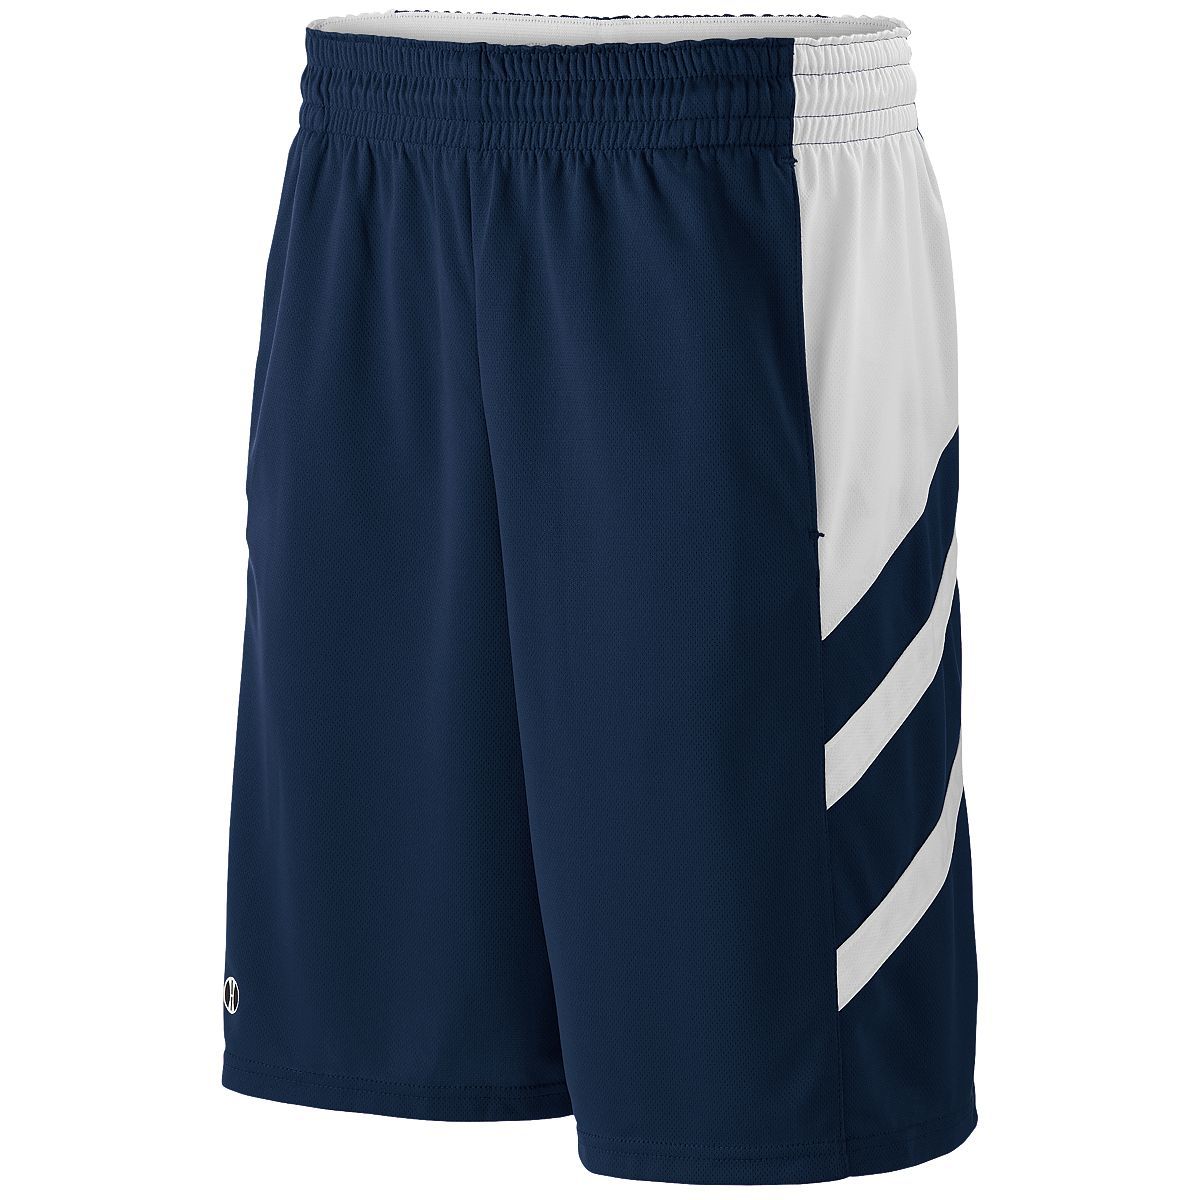 Holloway Helium Shorts in Navy/White  -Part of the Adult, Adult-Shorts, Holloway product lines at KanaleyCreations.com